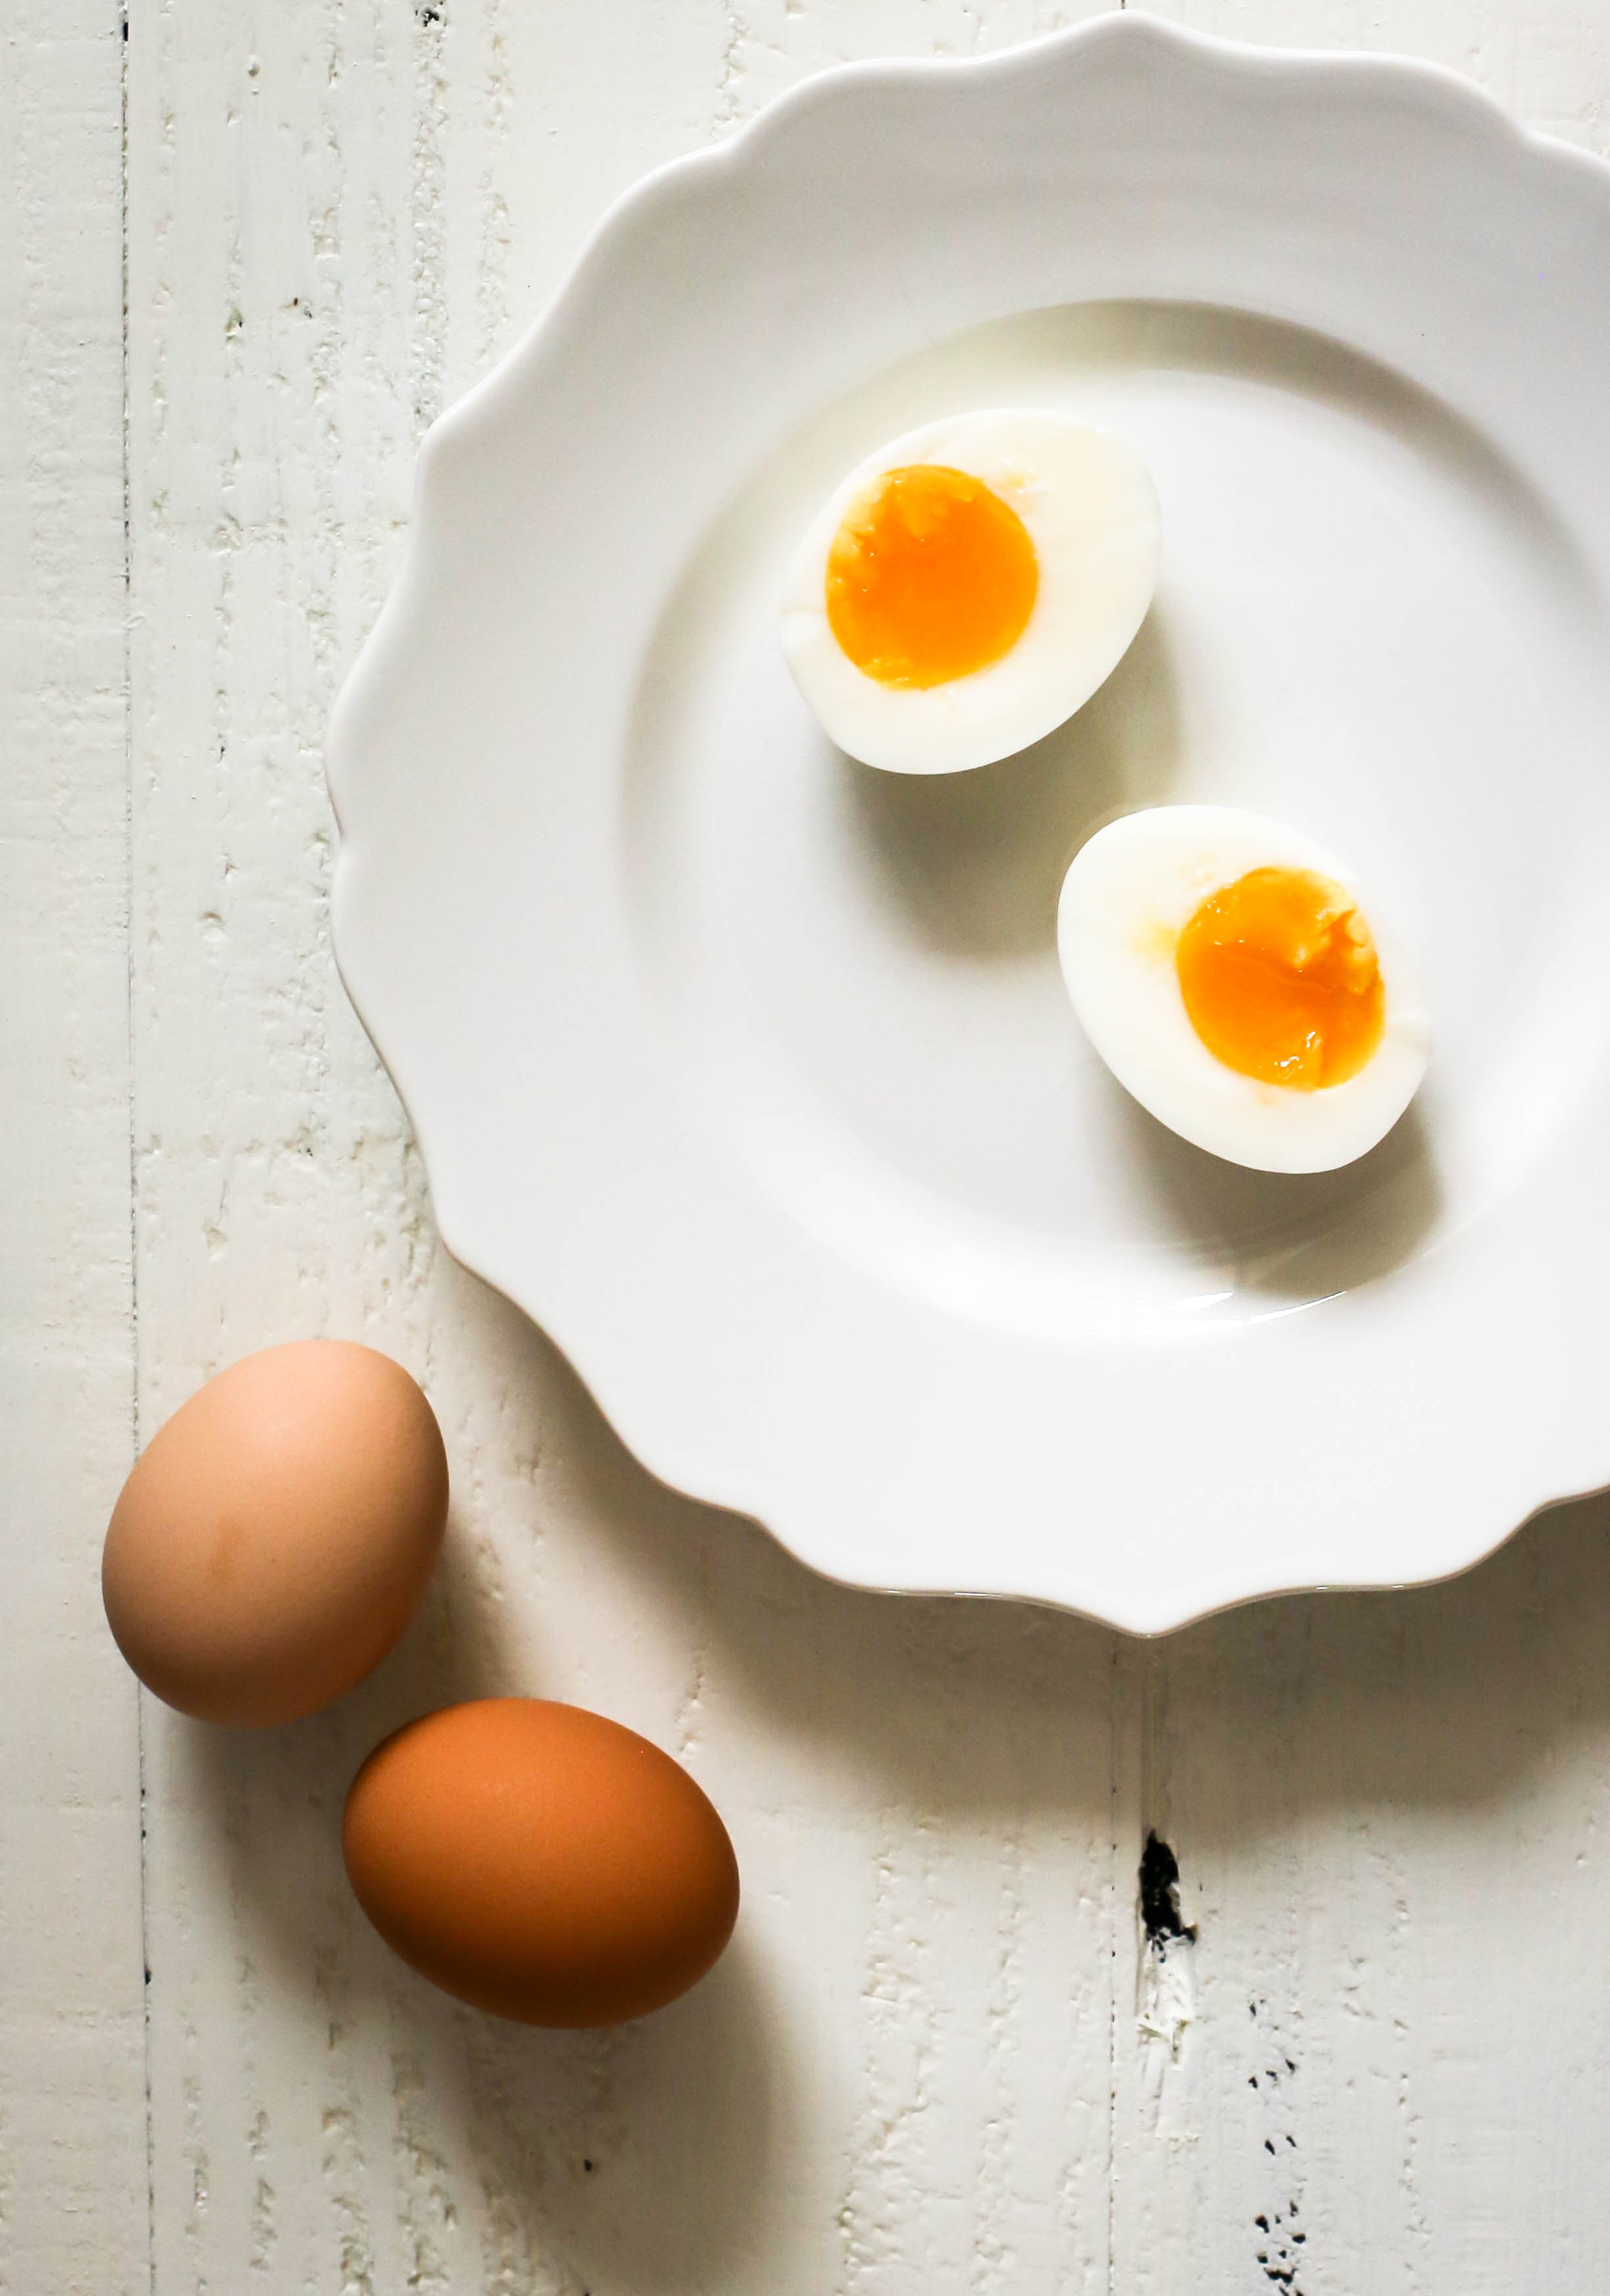 How To Make Soft-Boiled Eggs - Once Upon a Chef